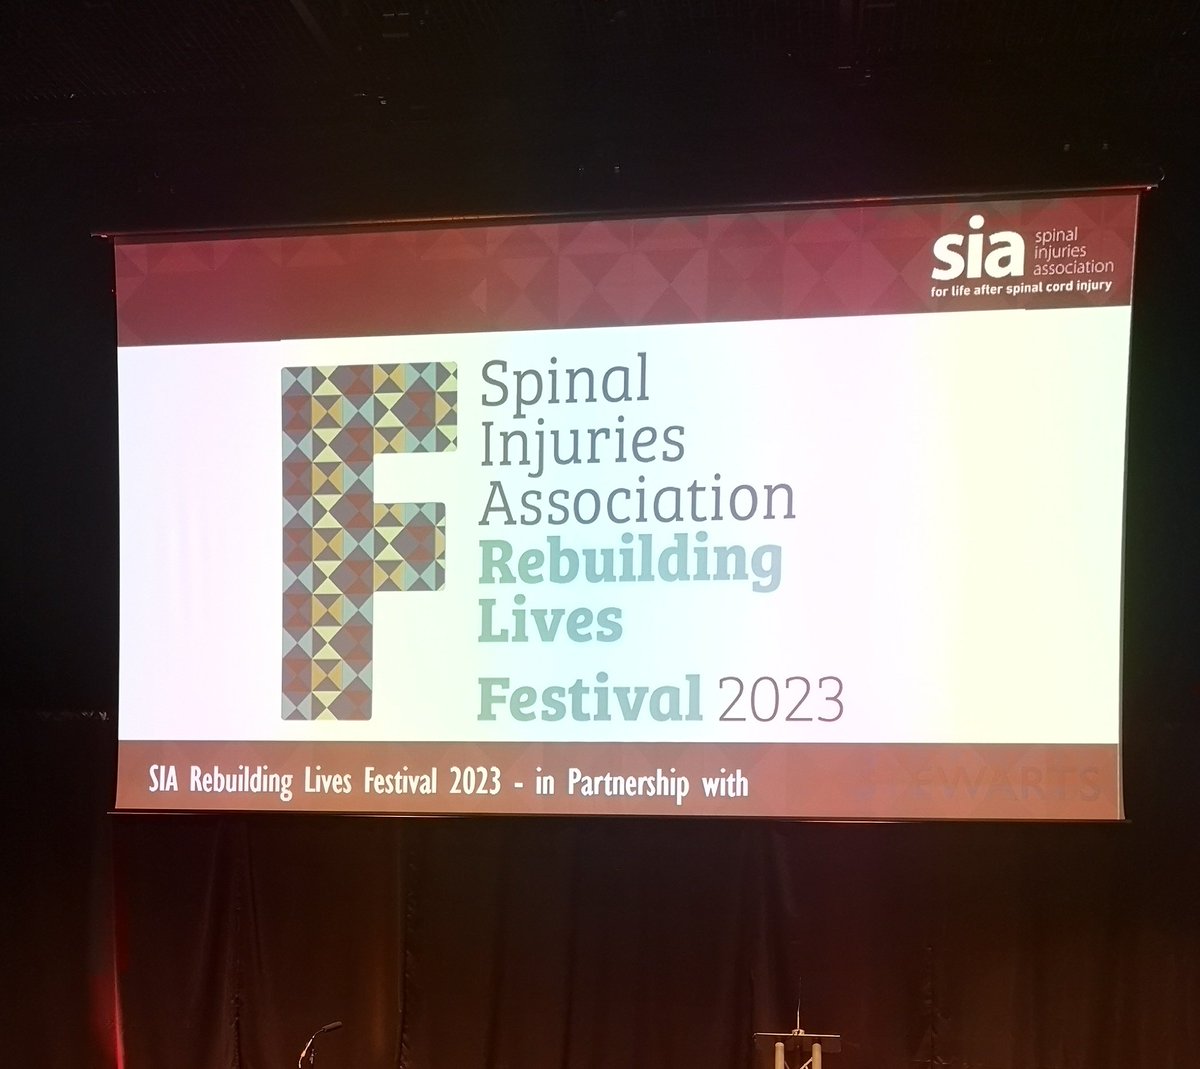 Looking forward to today's conference: Rebuilding Lives, by @spinalinjuries! Lots of great topics #mentalhealth #caudaequinasyndrome #bowelcare
Lets go...